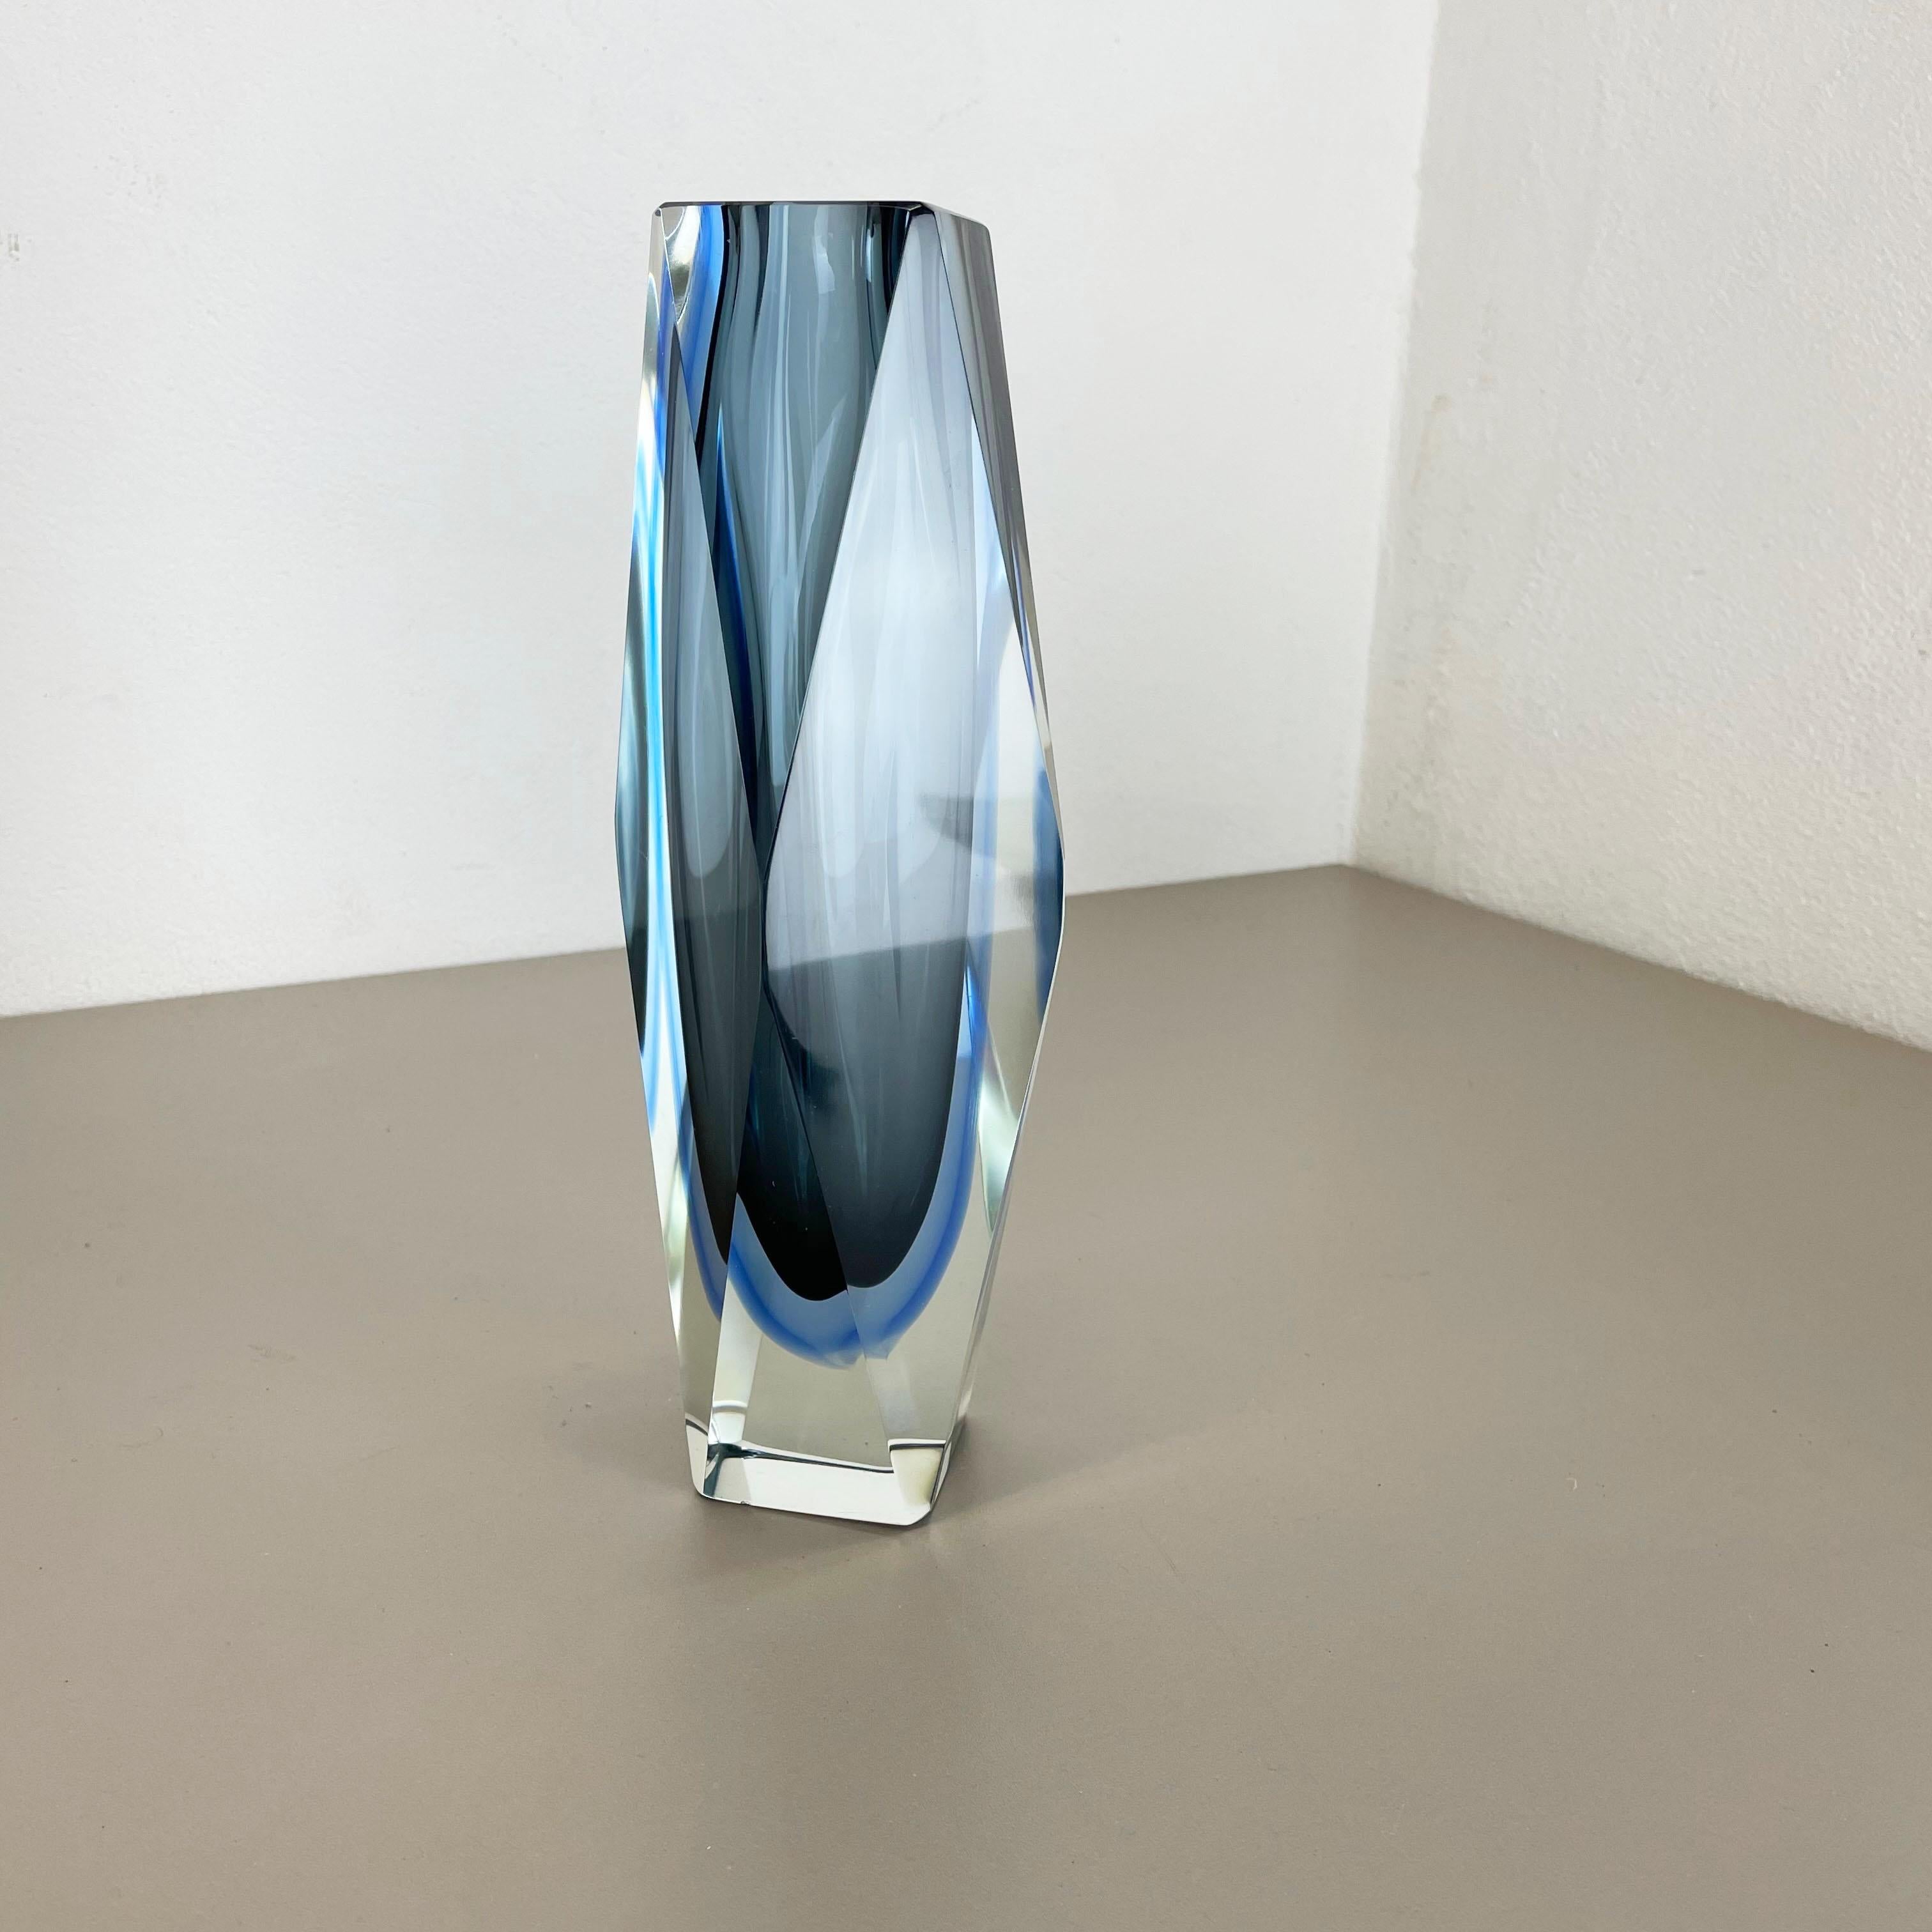 Mid-Century Modern Large Blue Mandruzzato Faceted Glass Sommerso Vase, Murano, Italy 1970s